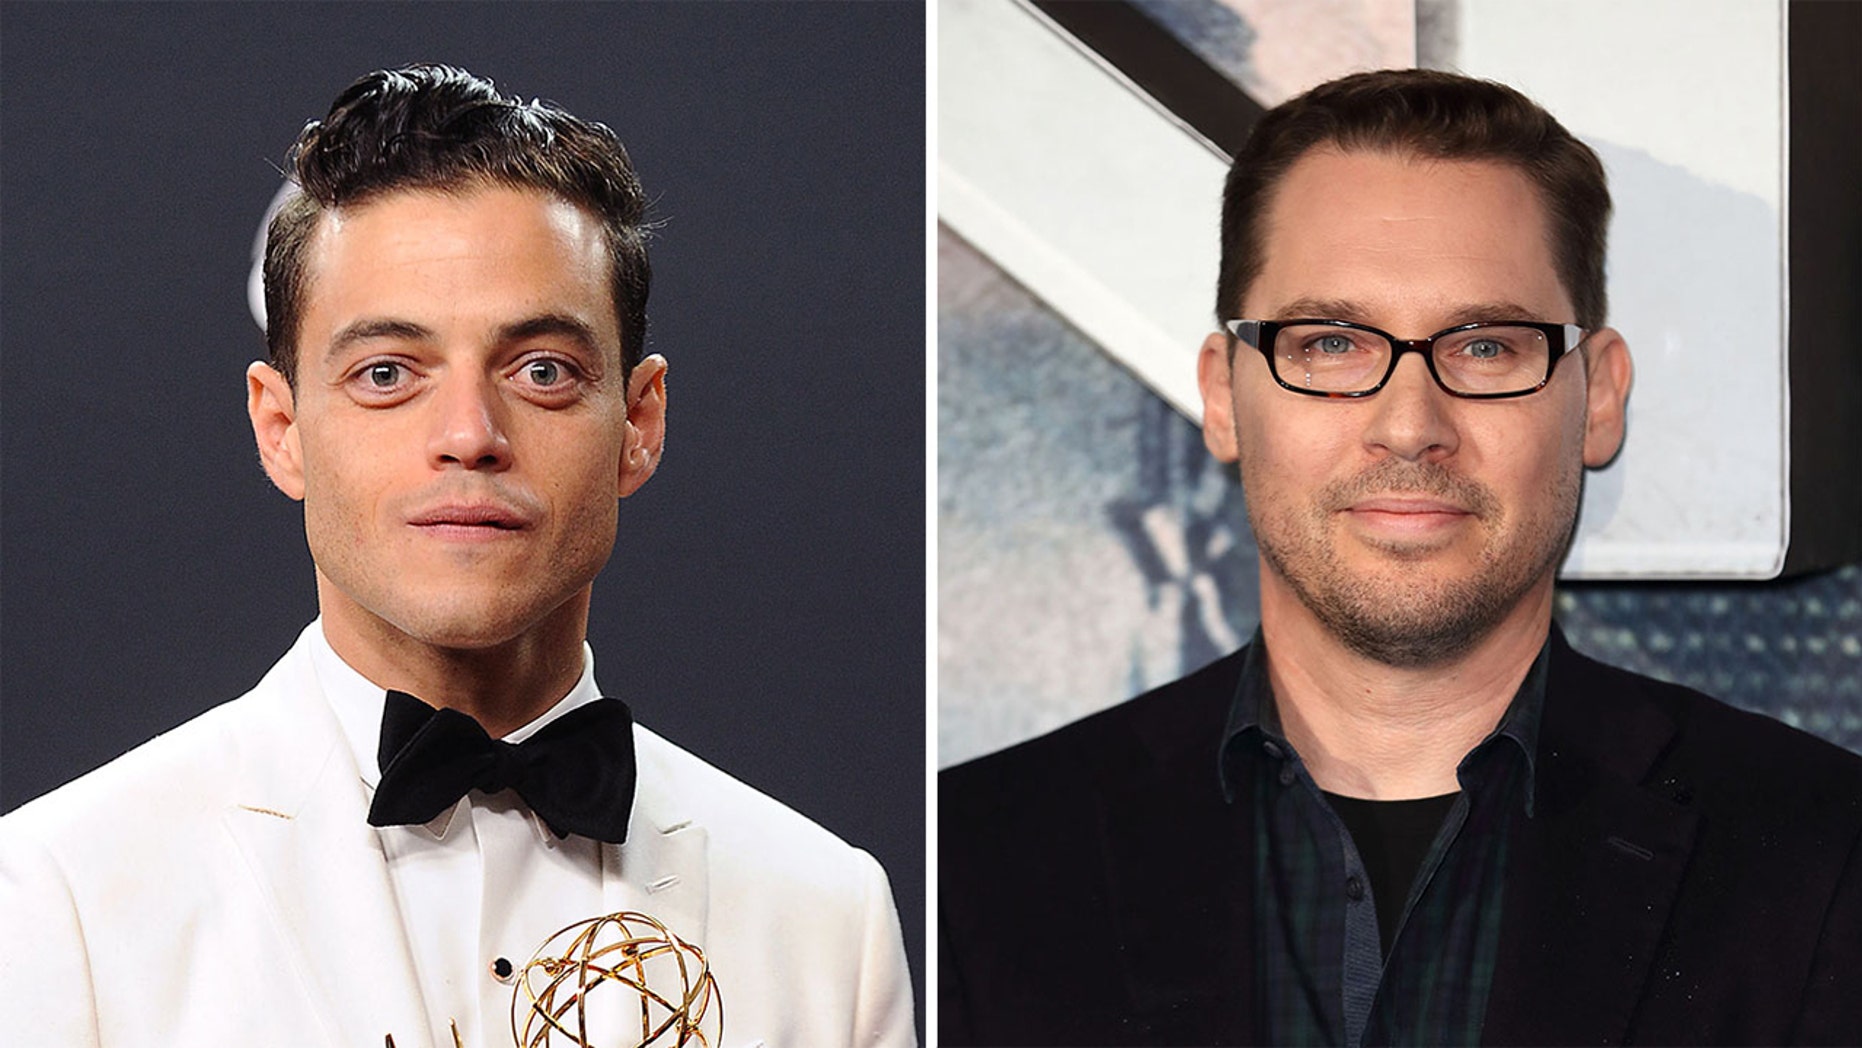 Rami Malek has spoken out about the continued allegations of sexual abuse against Bryan Singer, who directed Malek's recent film "Bohemian Rhapsody"